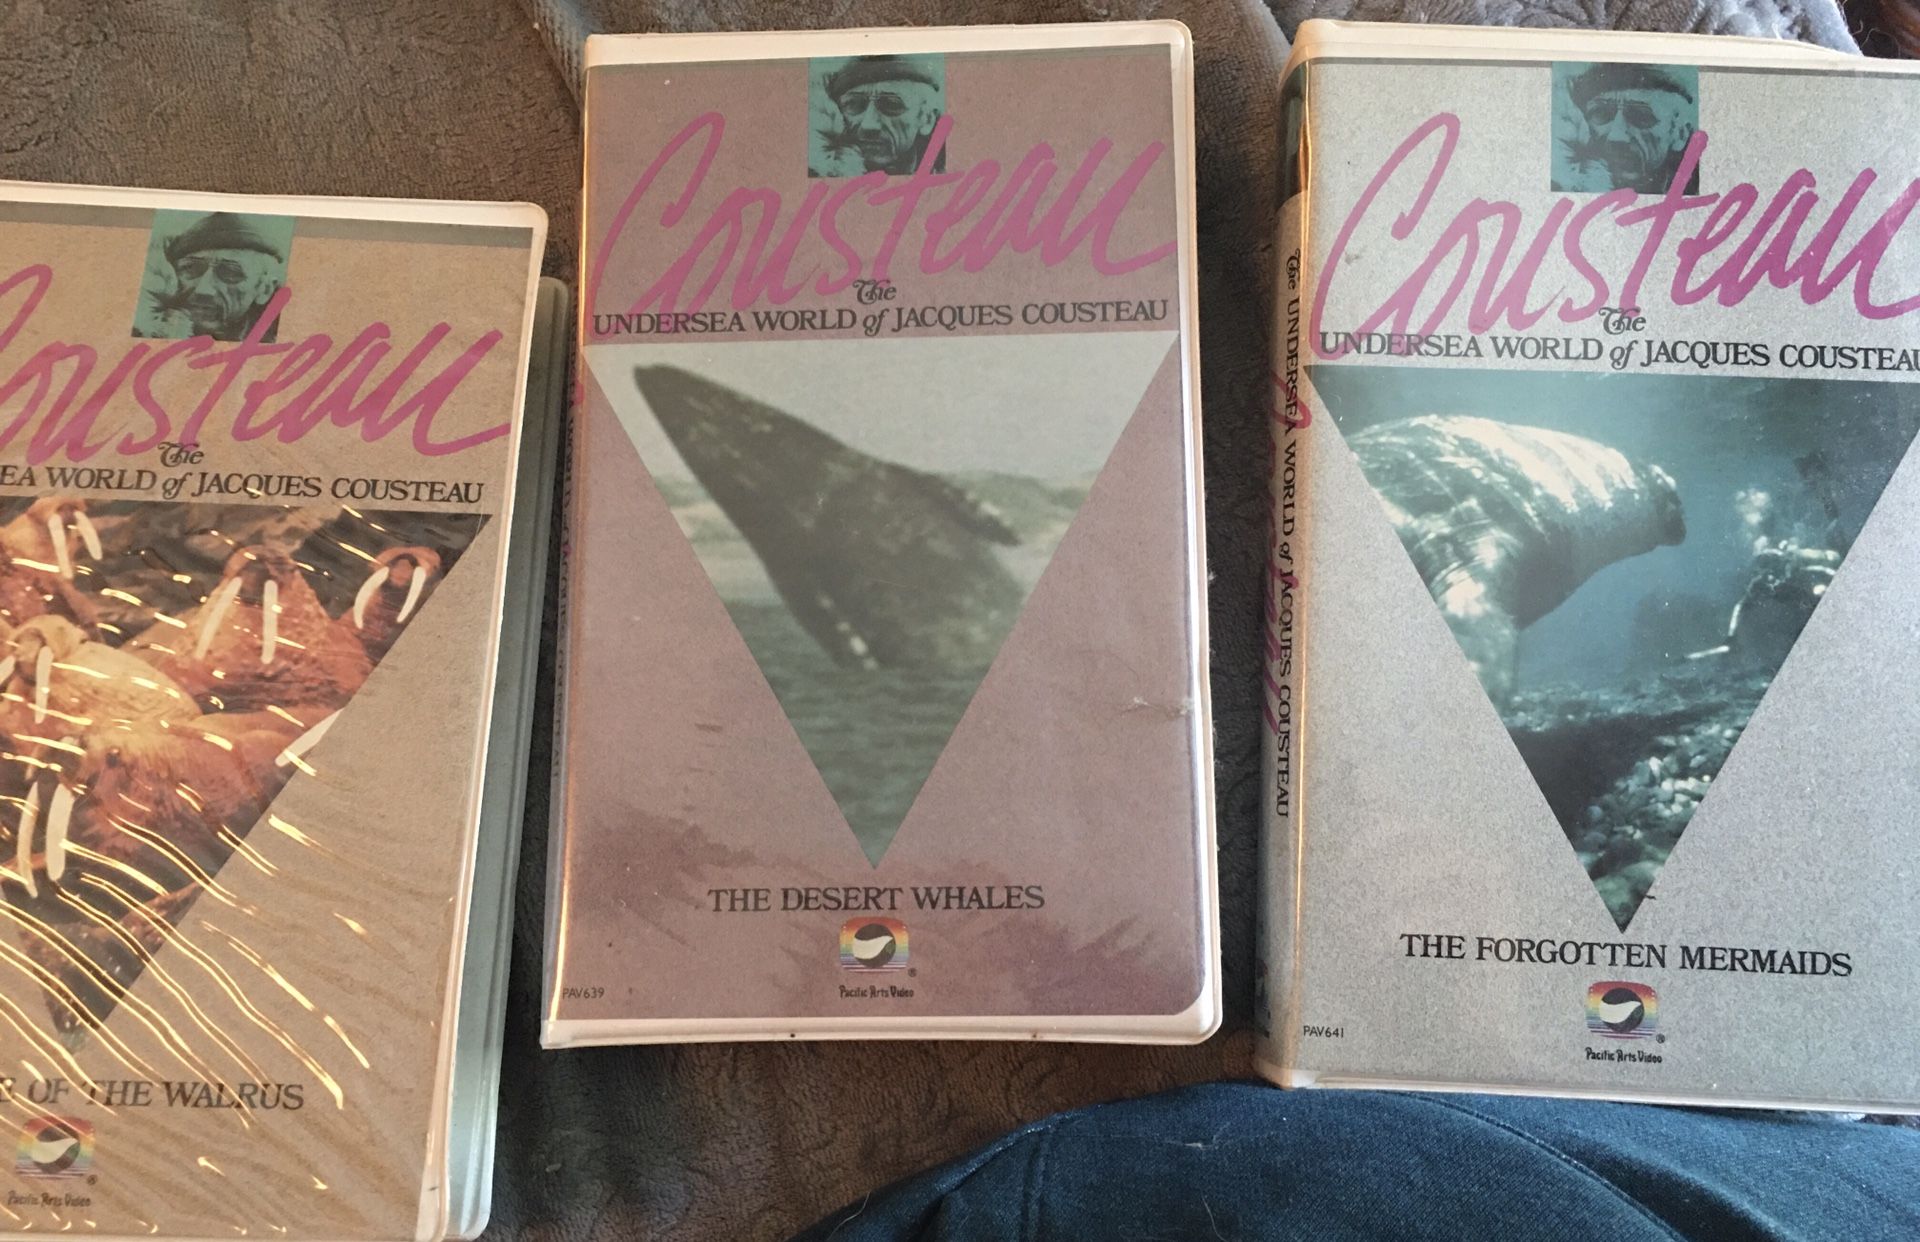 VHS from Jacques Cousteau/3 under sea world